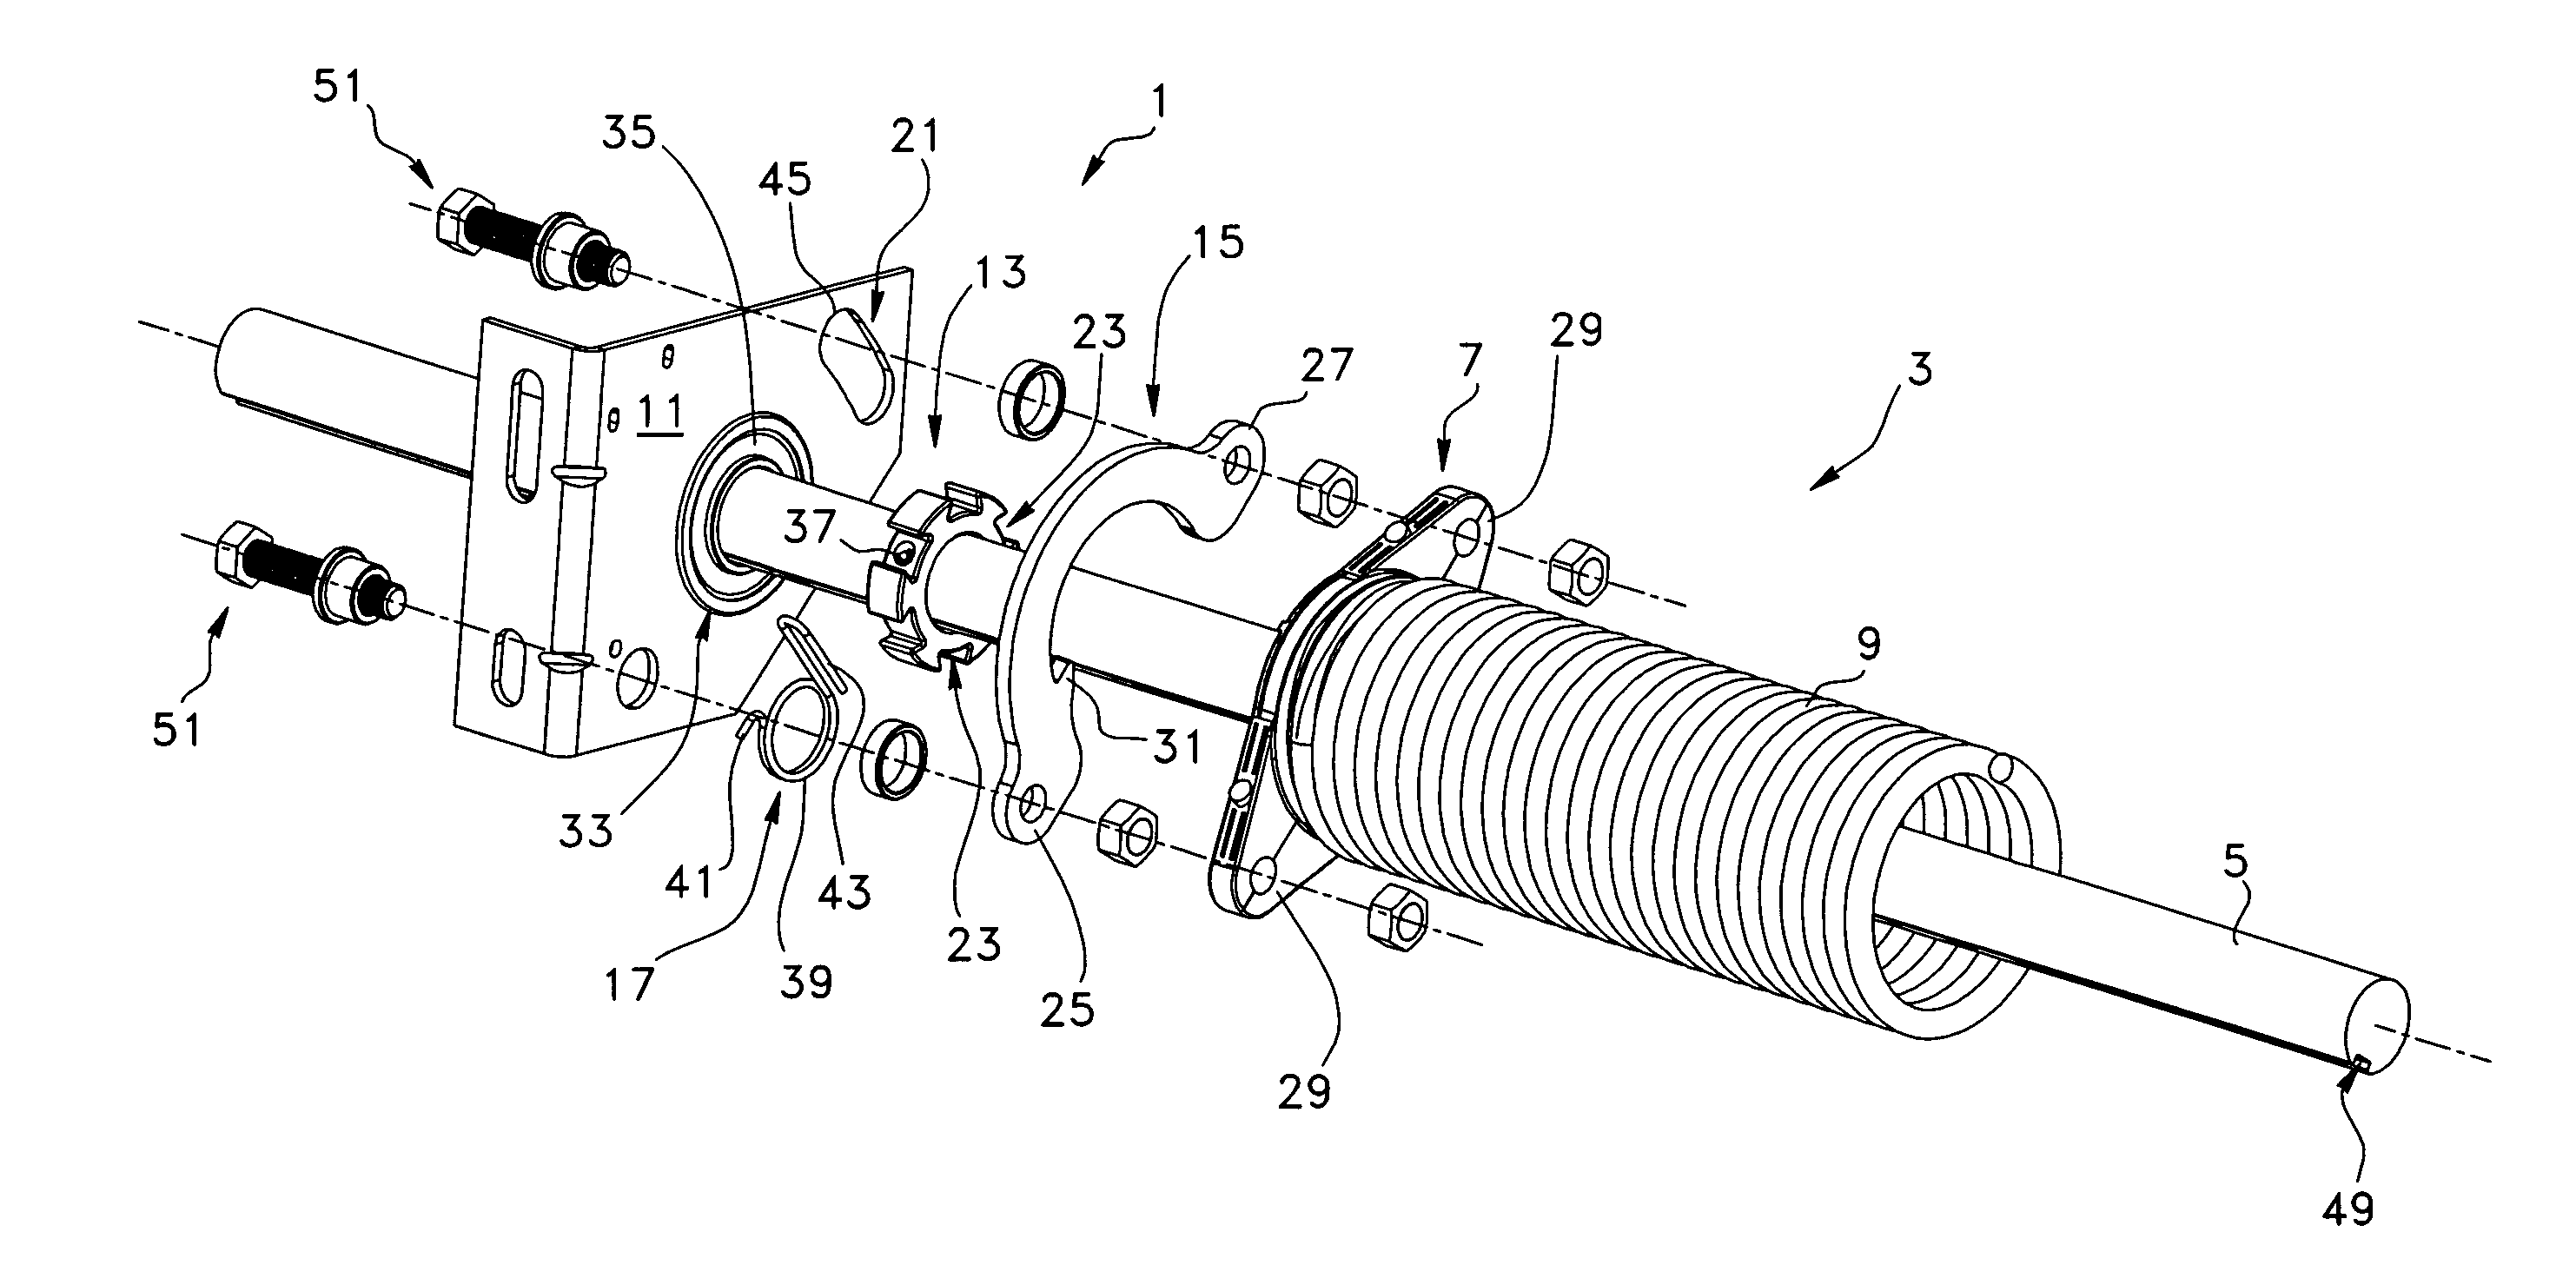 Braking device for garage doors and the like